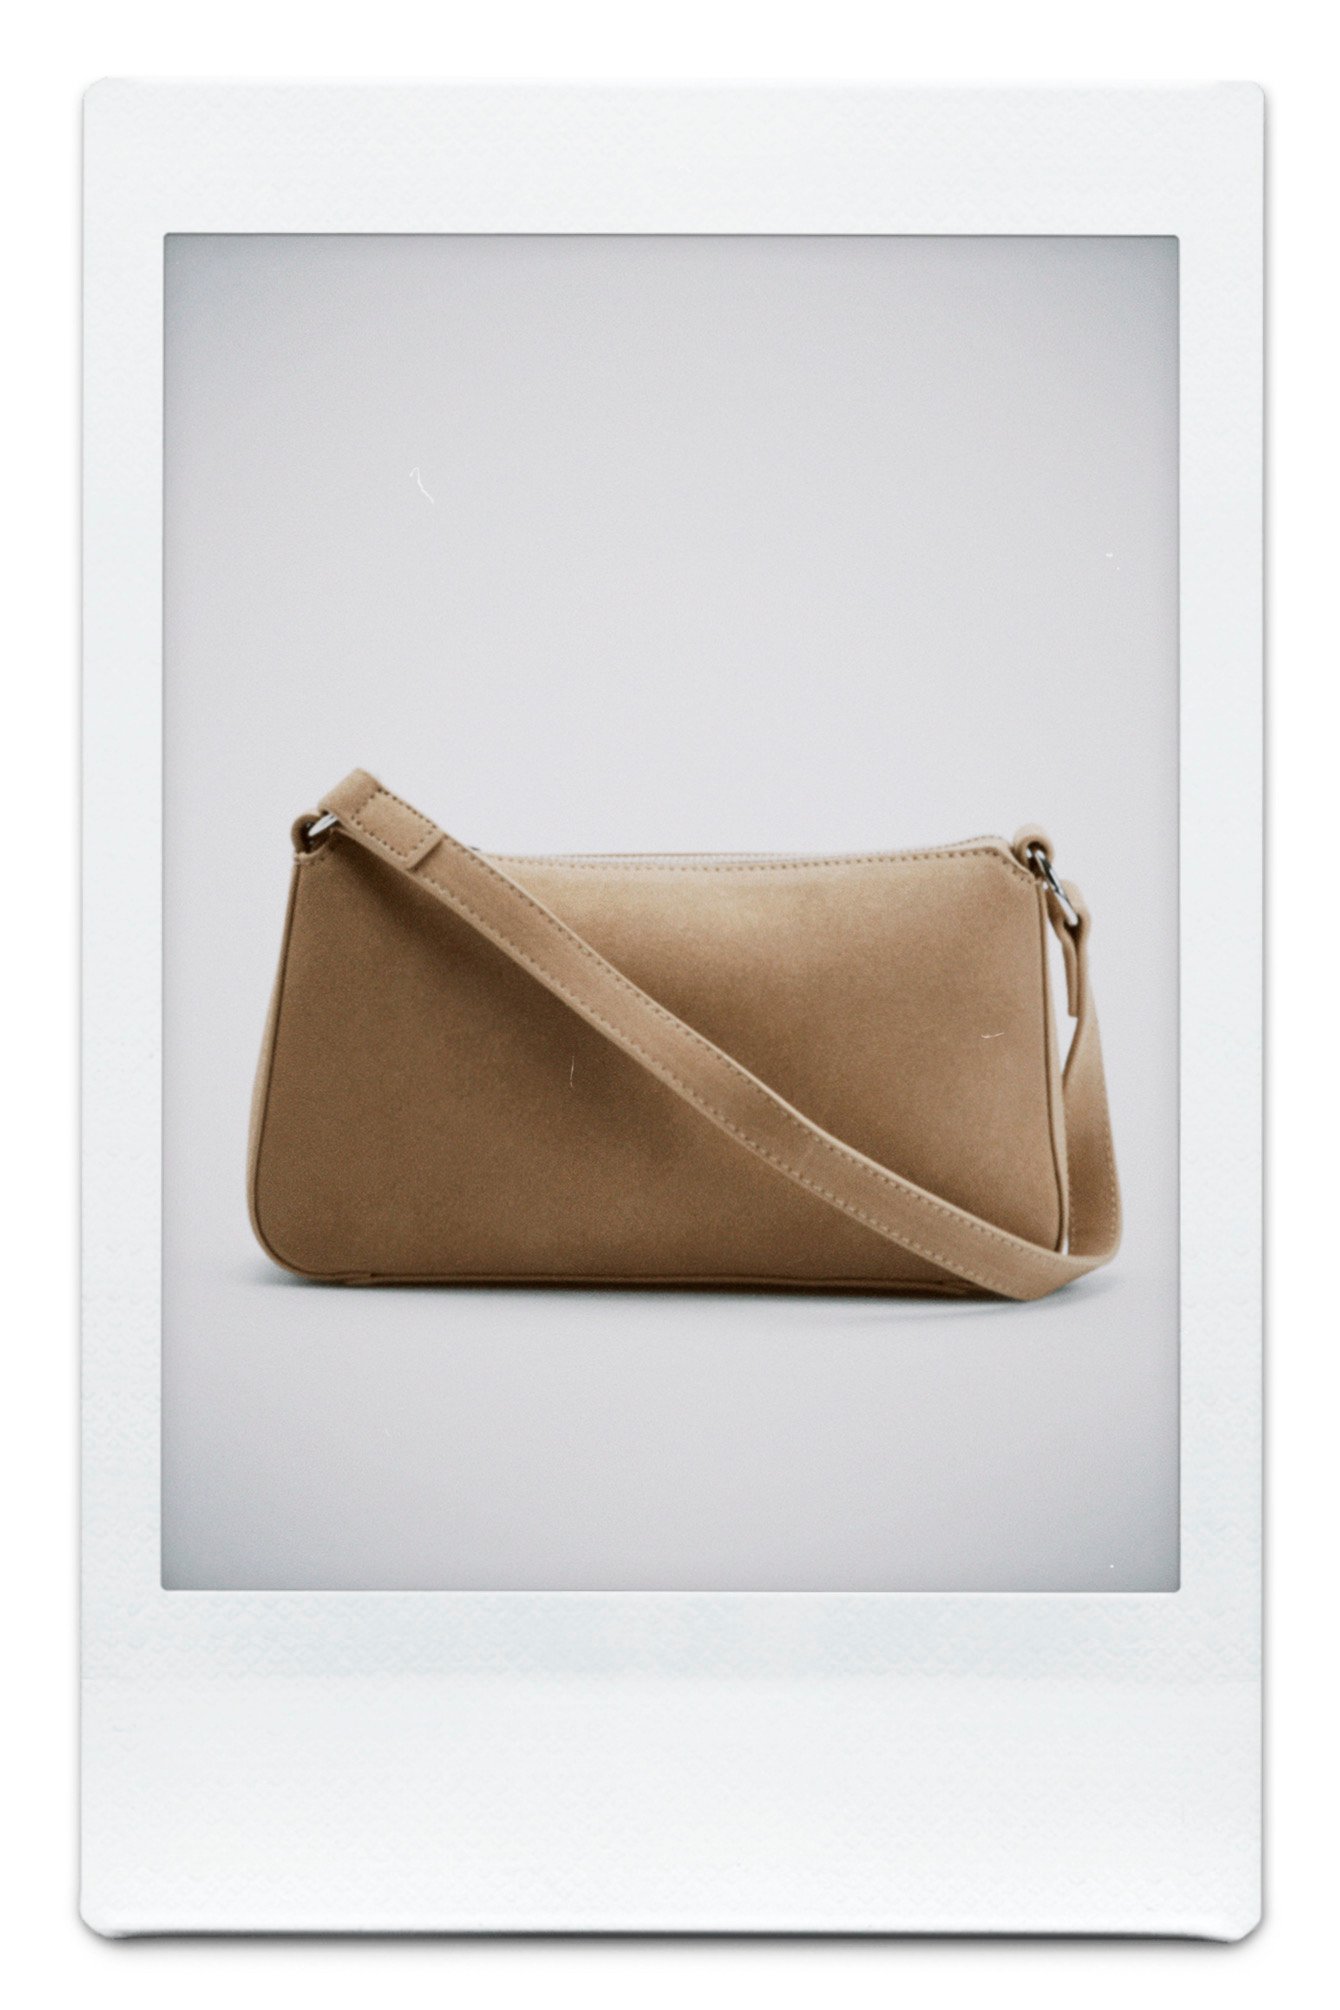 TAN CREAM AND BLACK faux leather clutch made in the UK. OVER SIZE ORANGE 